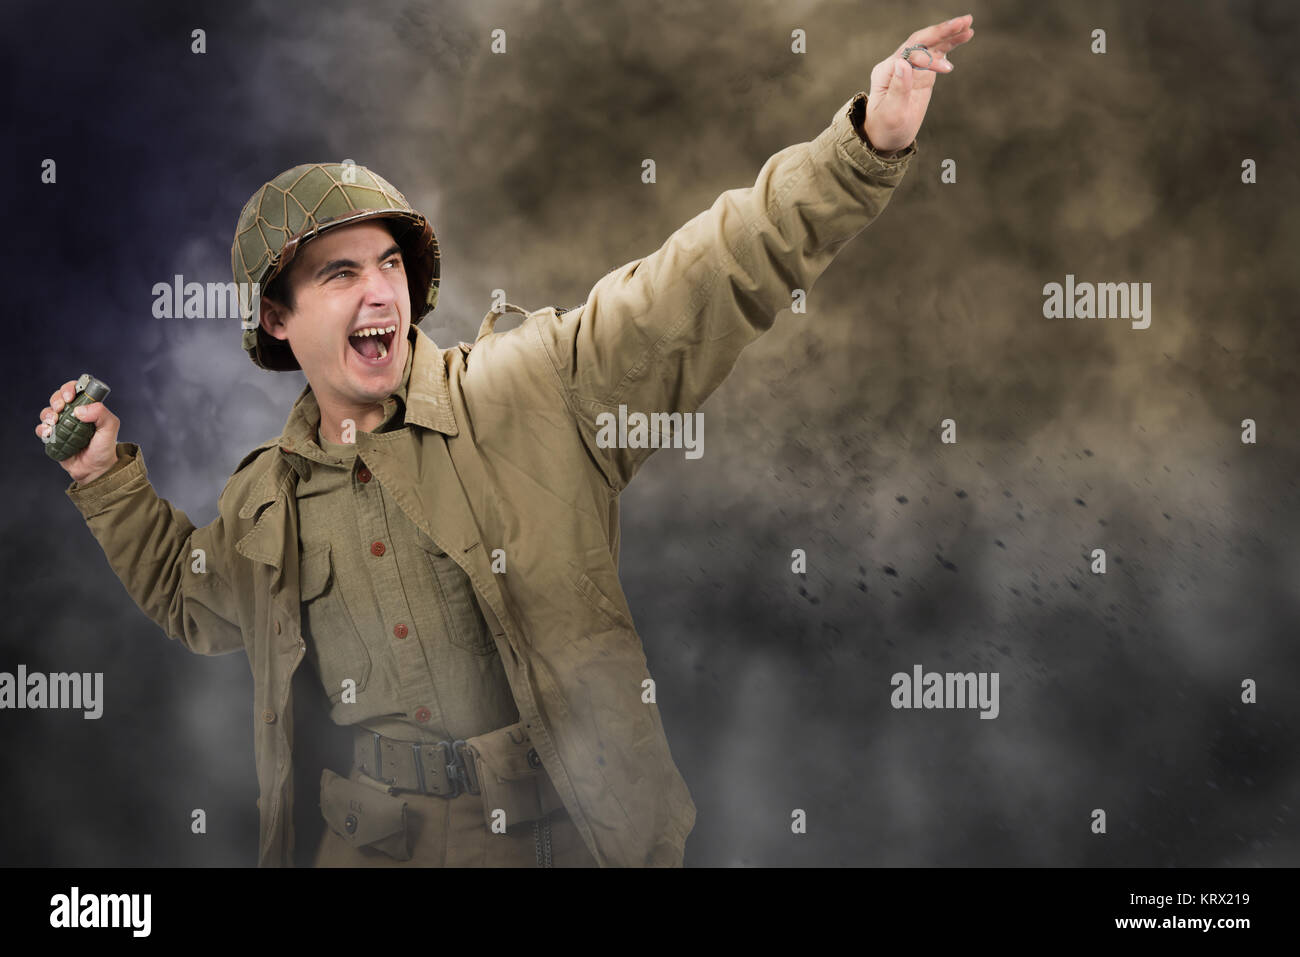 American soldier ww2 throwing a grenade Stock Photo